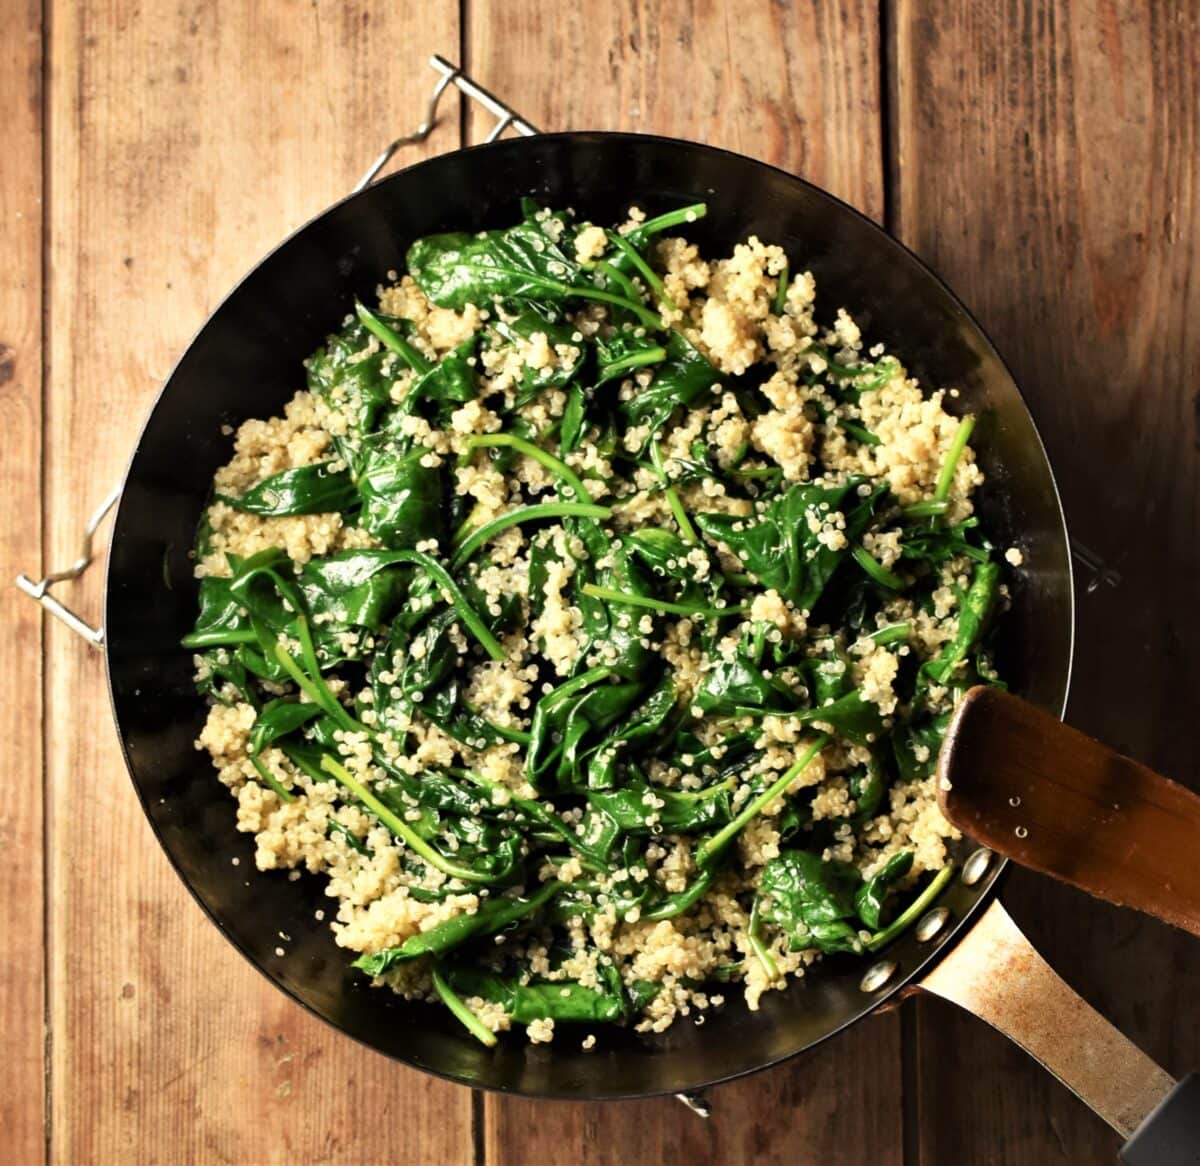 Wilted spinach and cooked quinoa in pan.